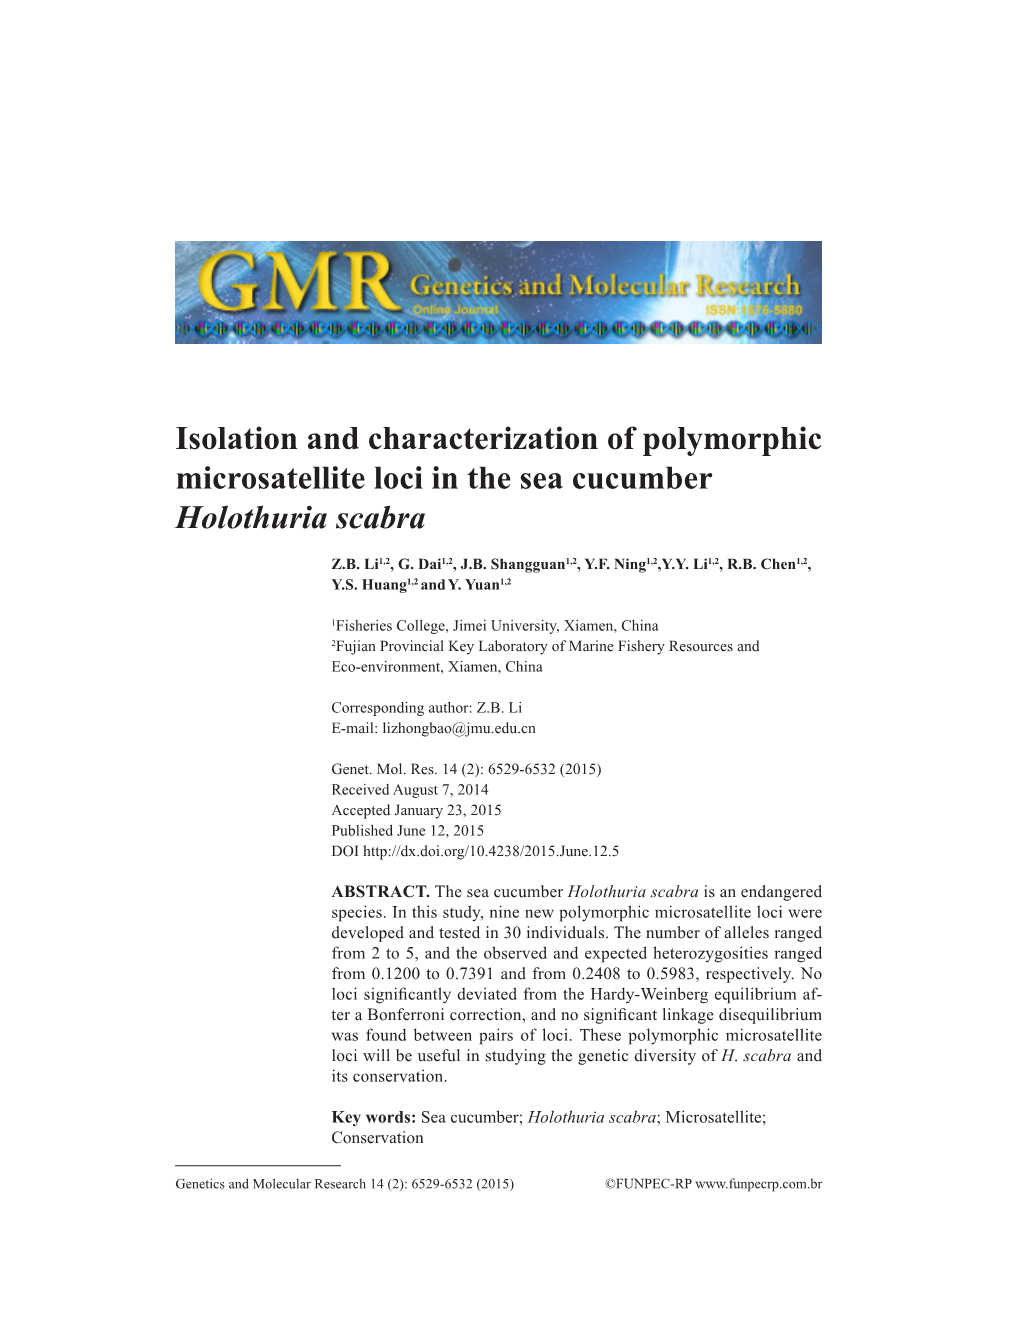 Isolation and Characterization of Polymorphic Microsatellite Loci in the Sea Cucumber Holothuria Scabra